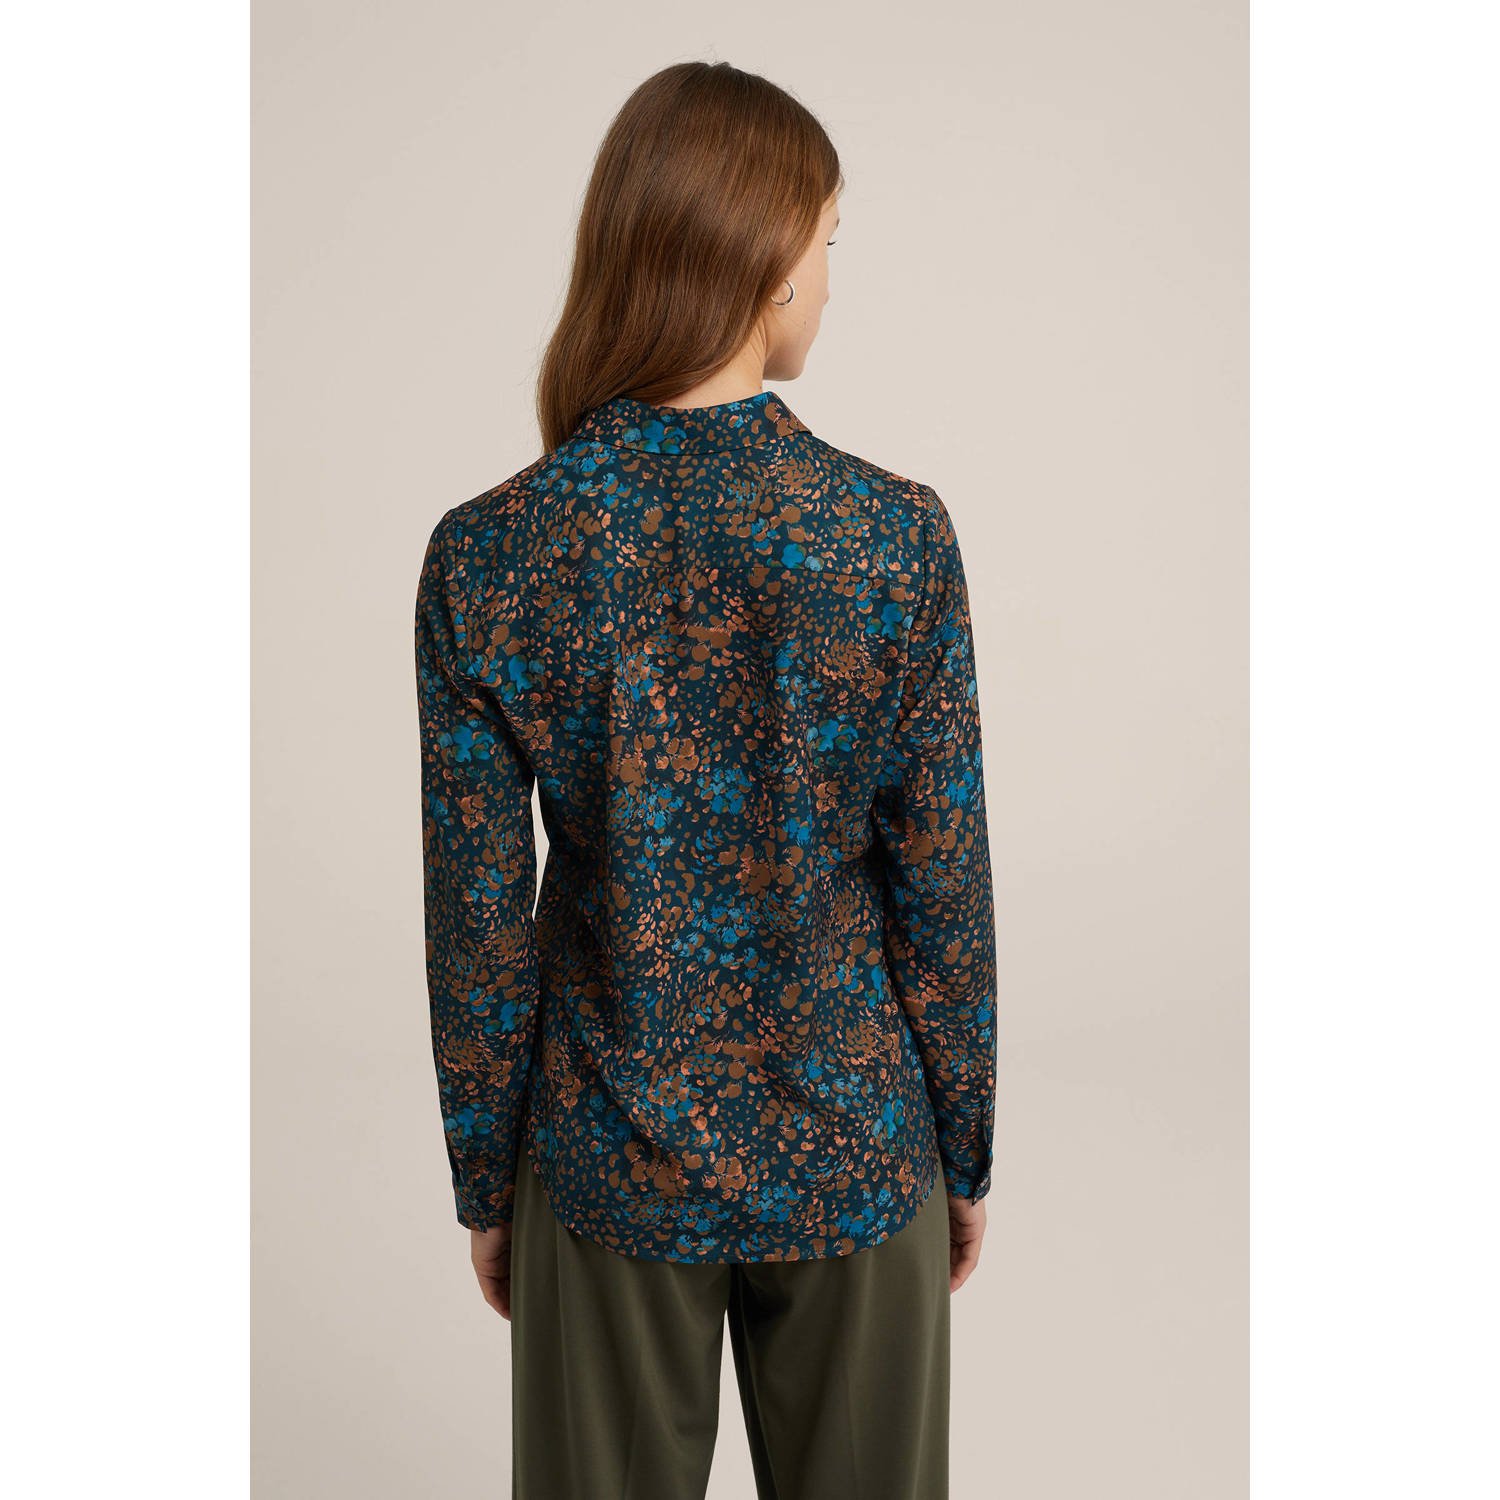 WE Fashion blouse met all over print petrol bruin blauw